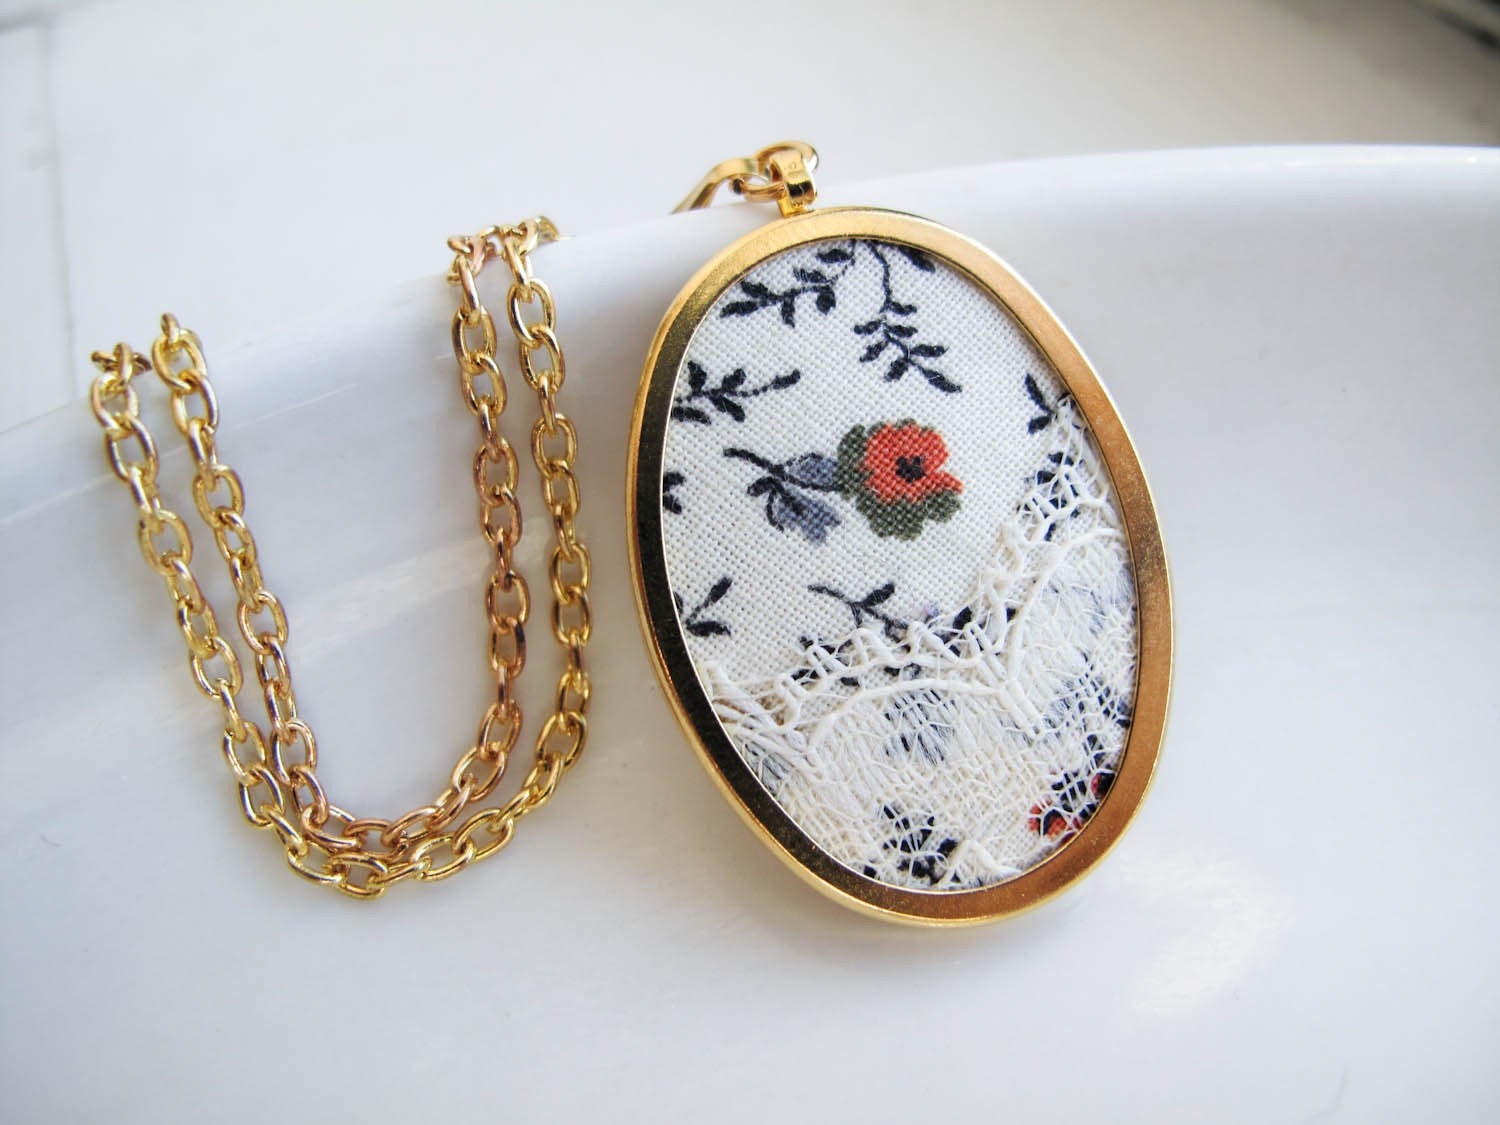 Vines and Lace Necklace in Vintage Fabric and Gold - READY TO SHIP